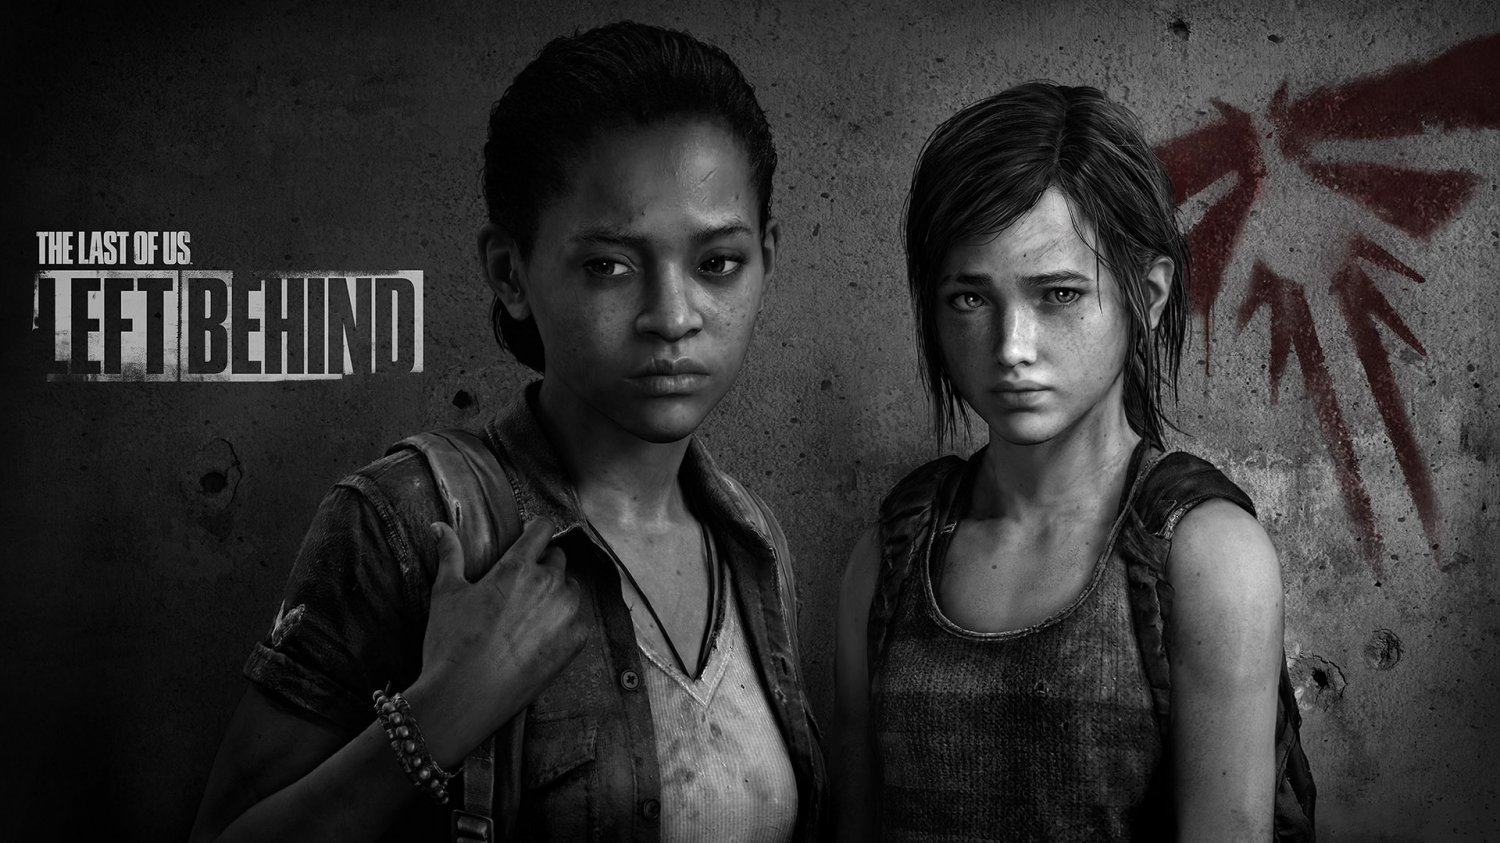 The Last of Us Left Behind Ellie and Riley 18"x28" (45cm/70cm) Poster